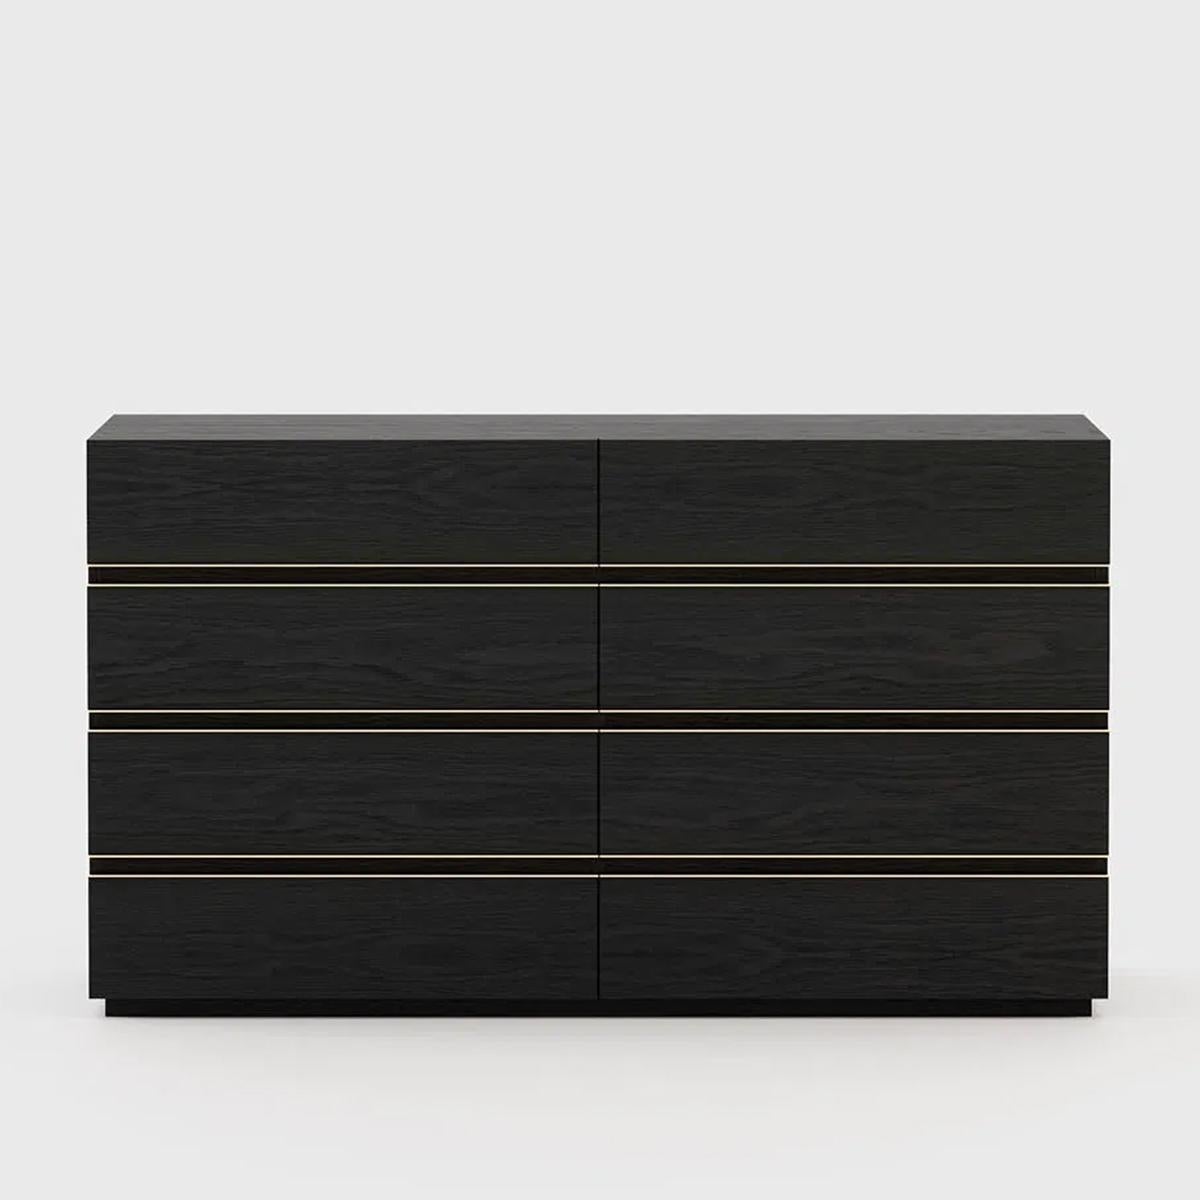 Chest of drawers Clark black ash with structure
in ash wood in blackened matte finish. With polished
stainless steel trims in gold finish. Including 8 drawers
with easy glide system.
Also available with other finishes on request.